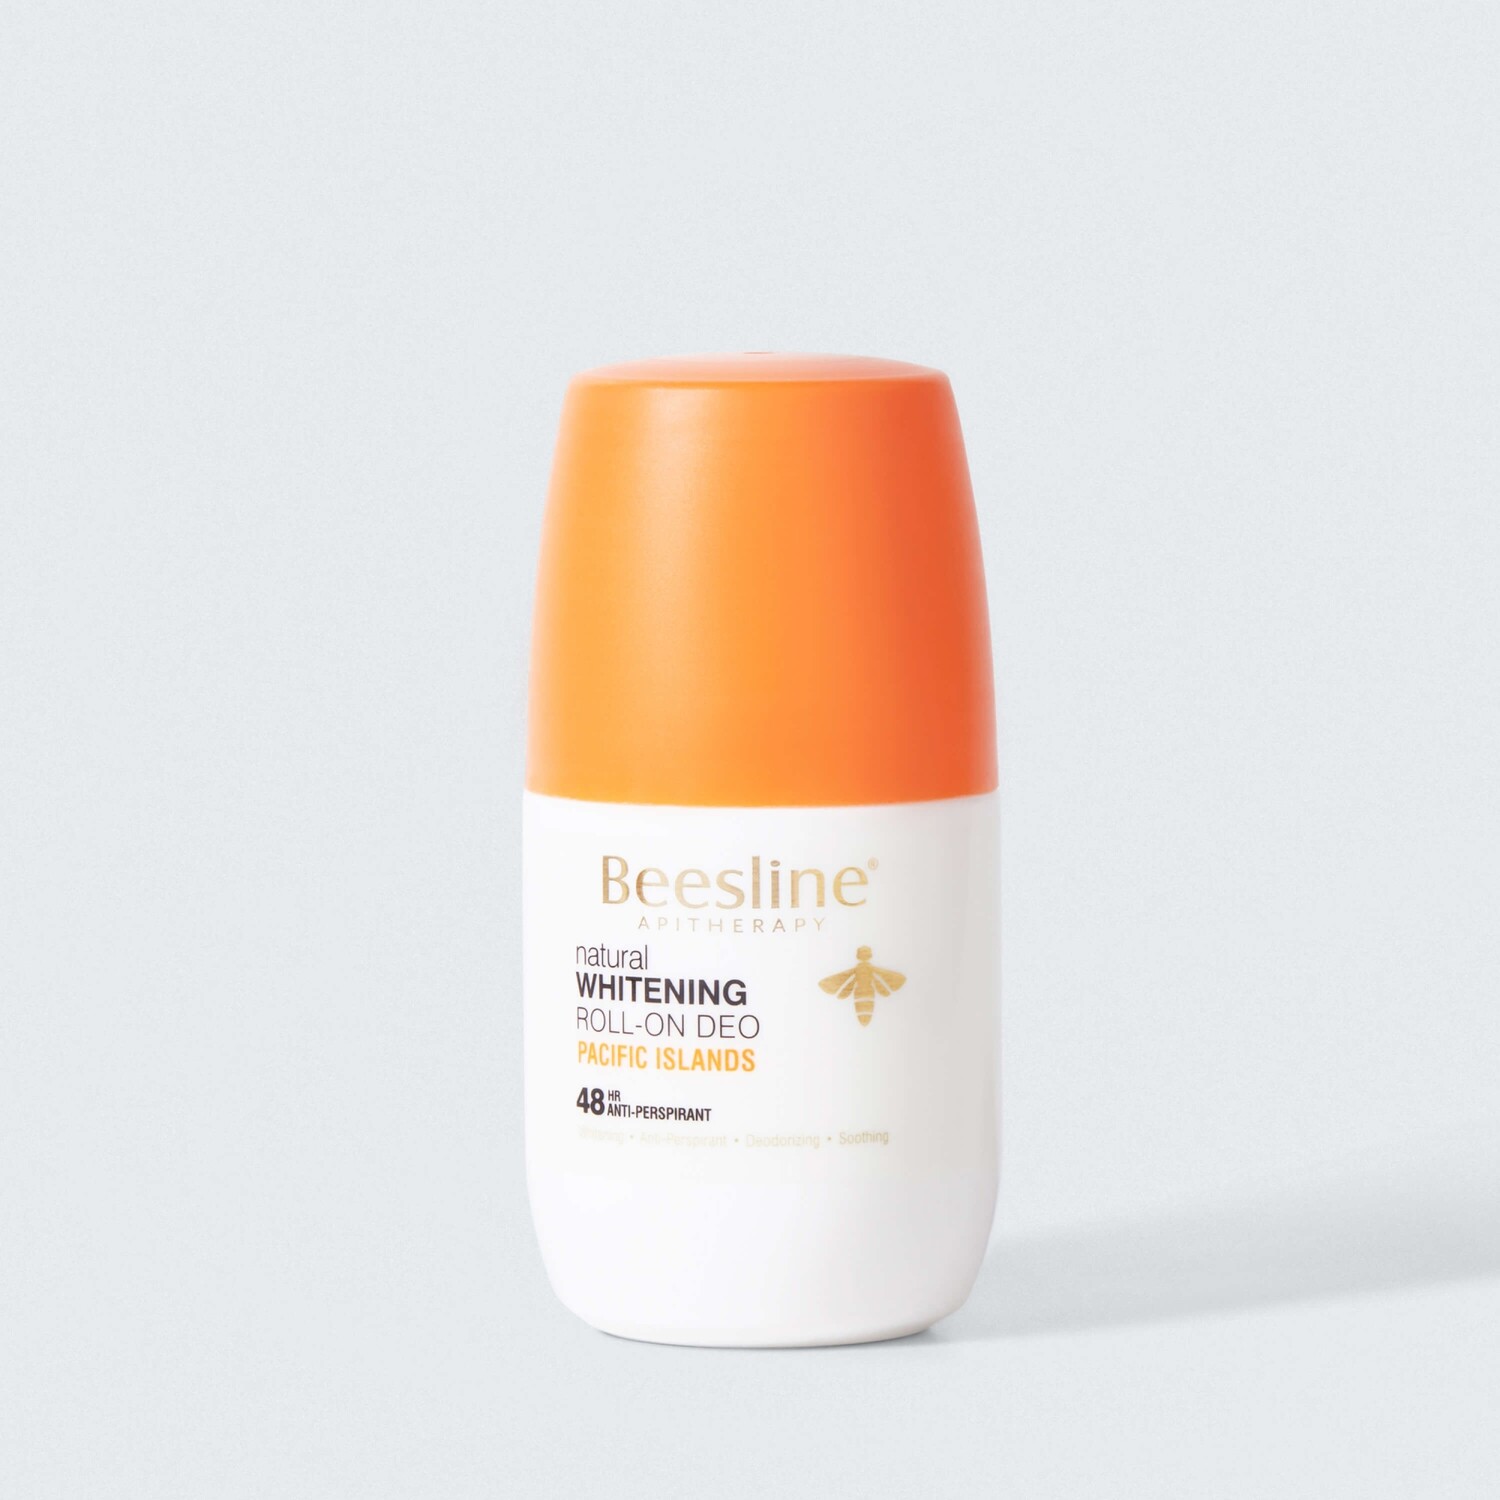 BEESLINE - Whitening Roll-on Deo | Pacific Islands